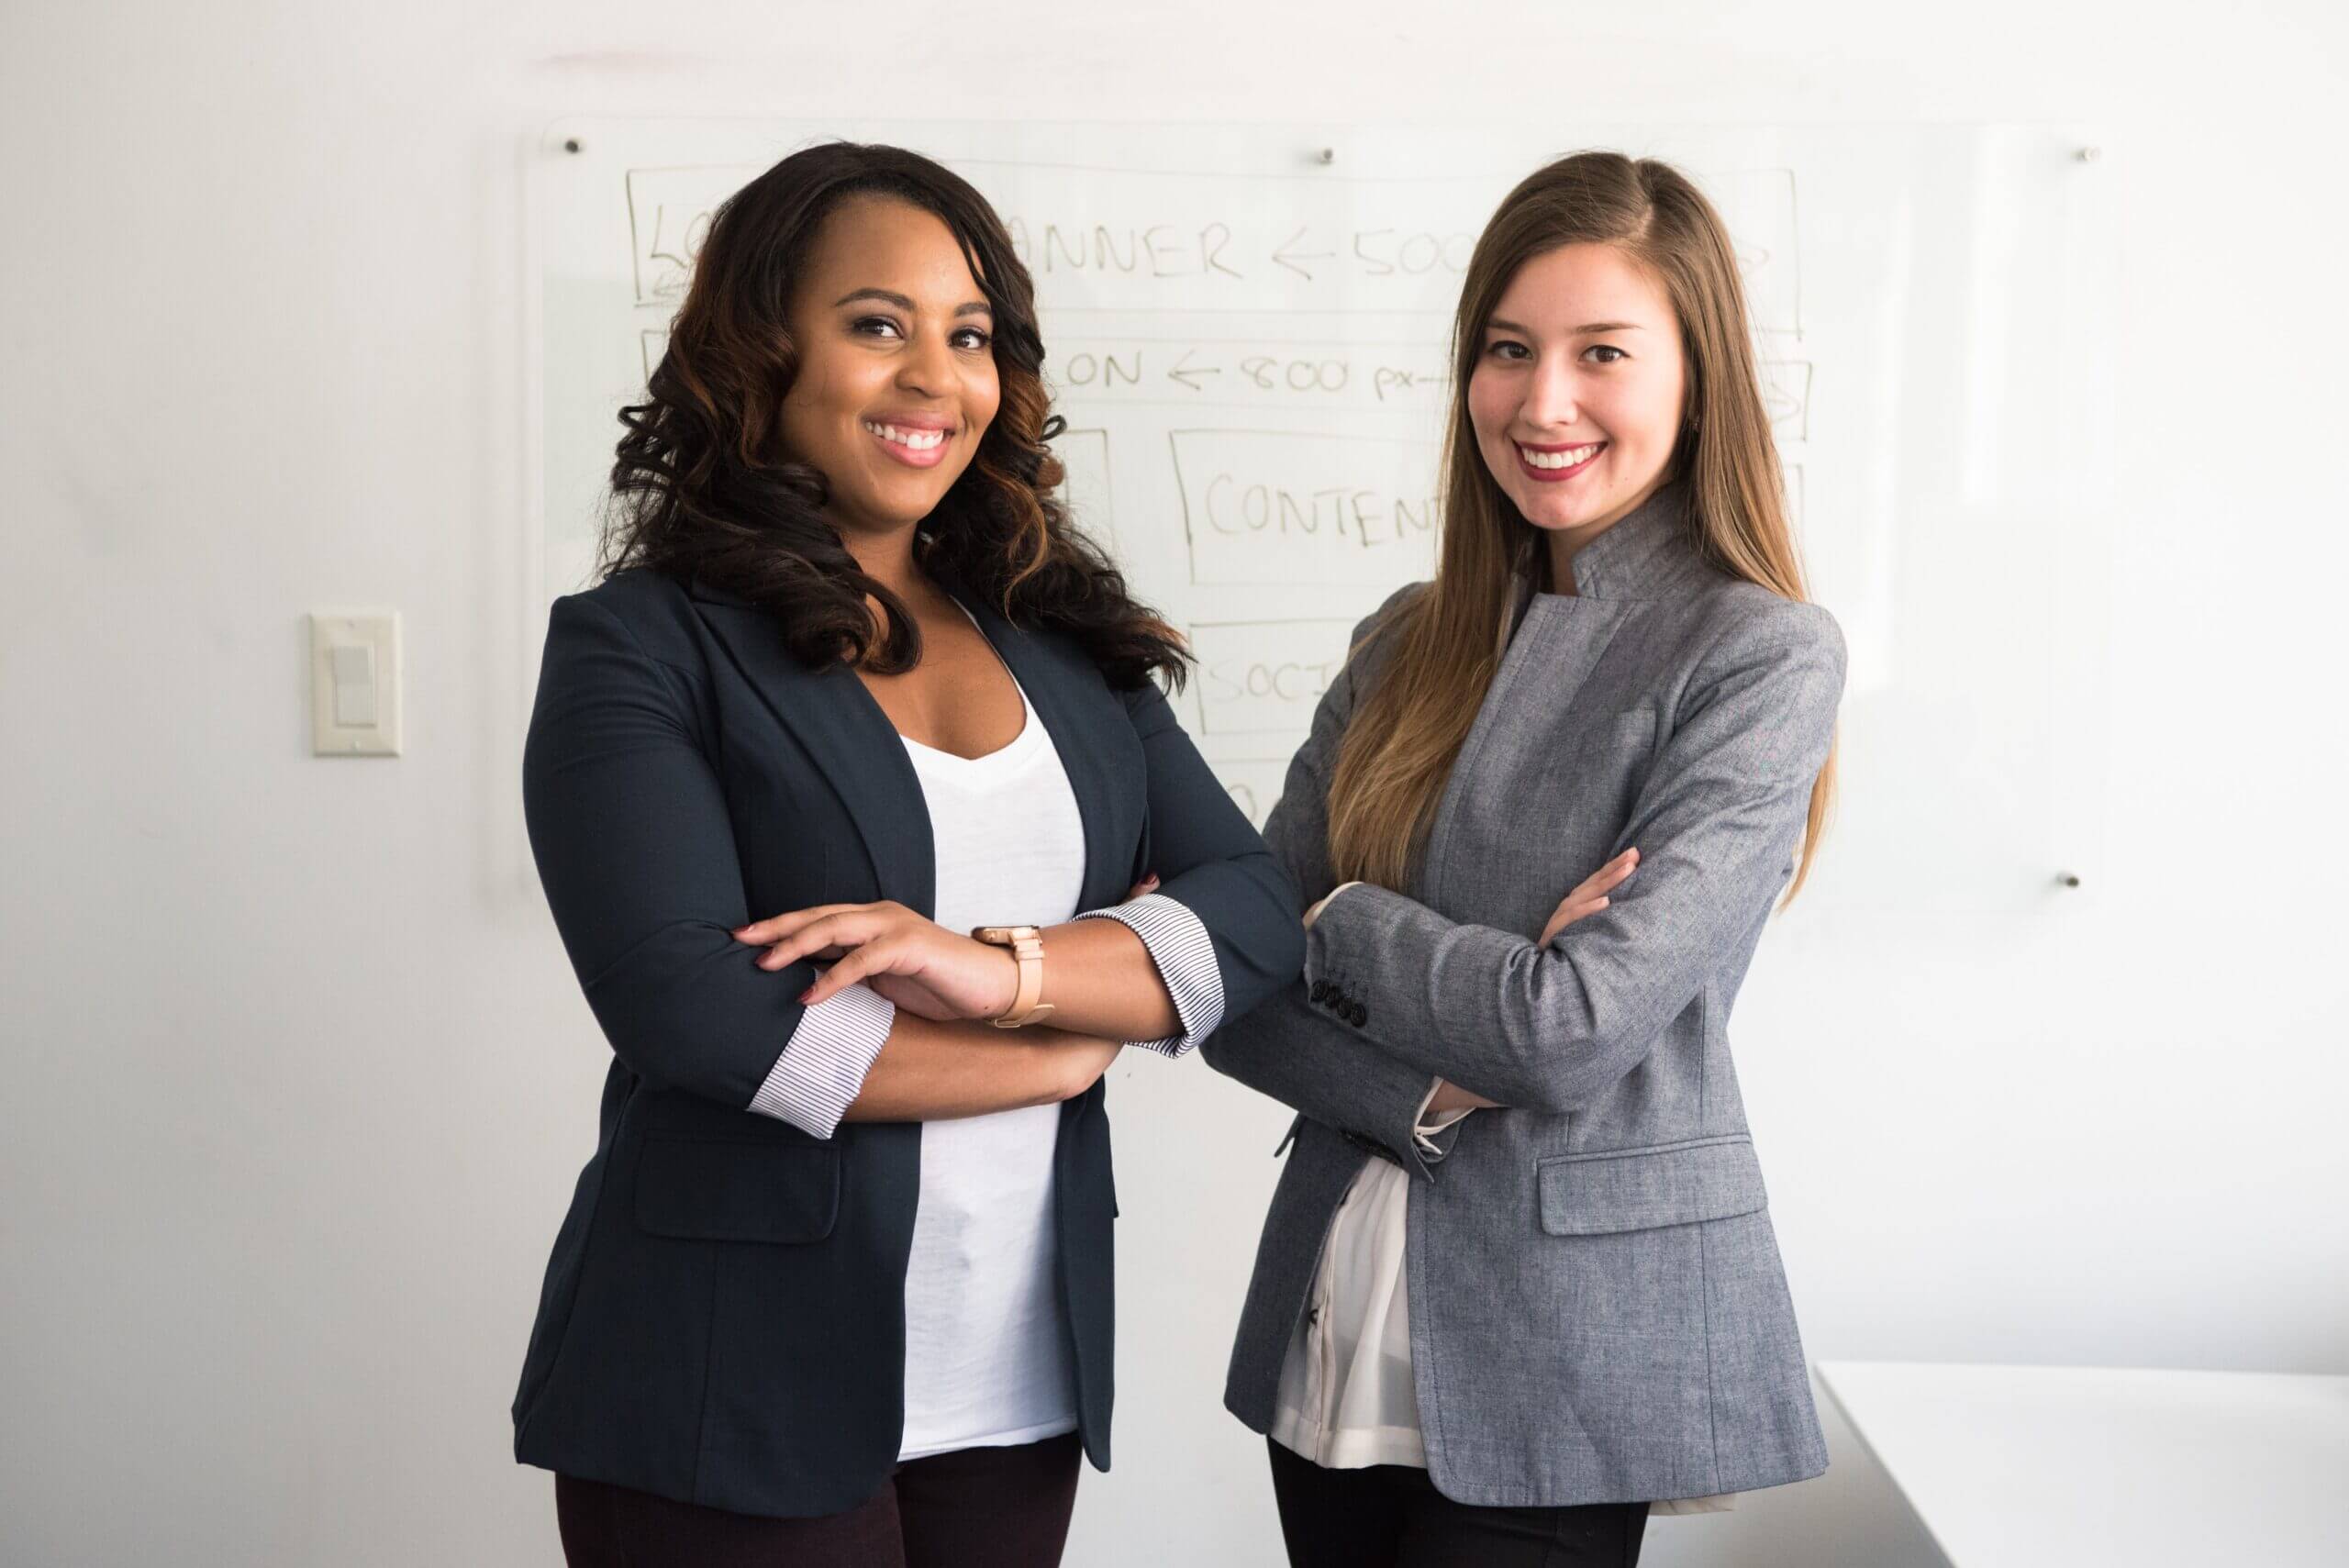 Two professional women smiling confidently in front of a whiteboard with planning notes.